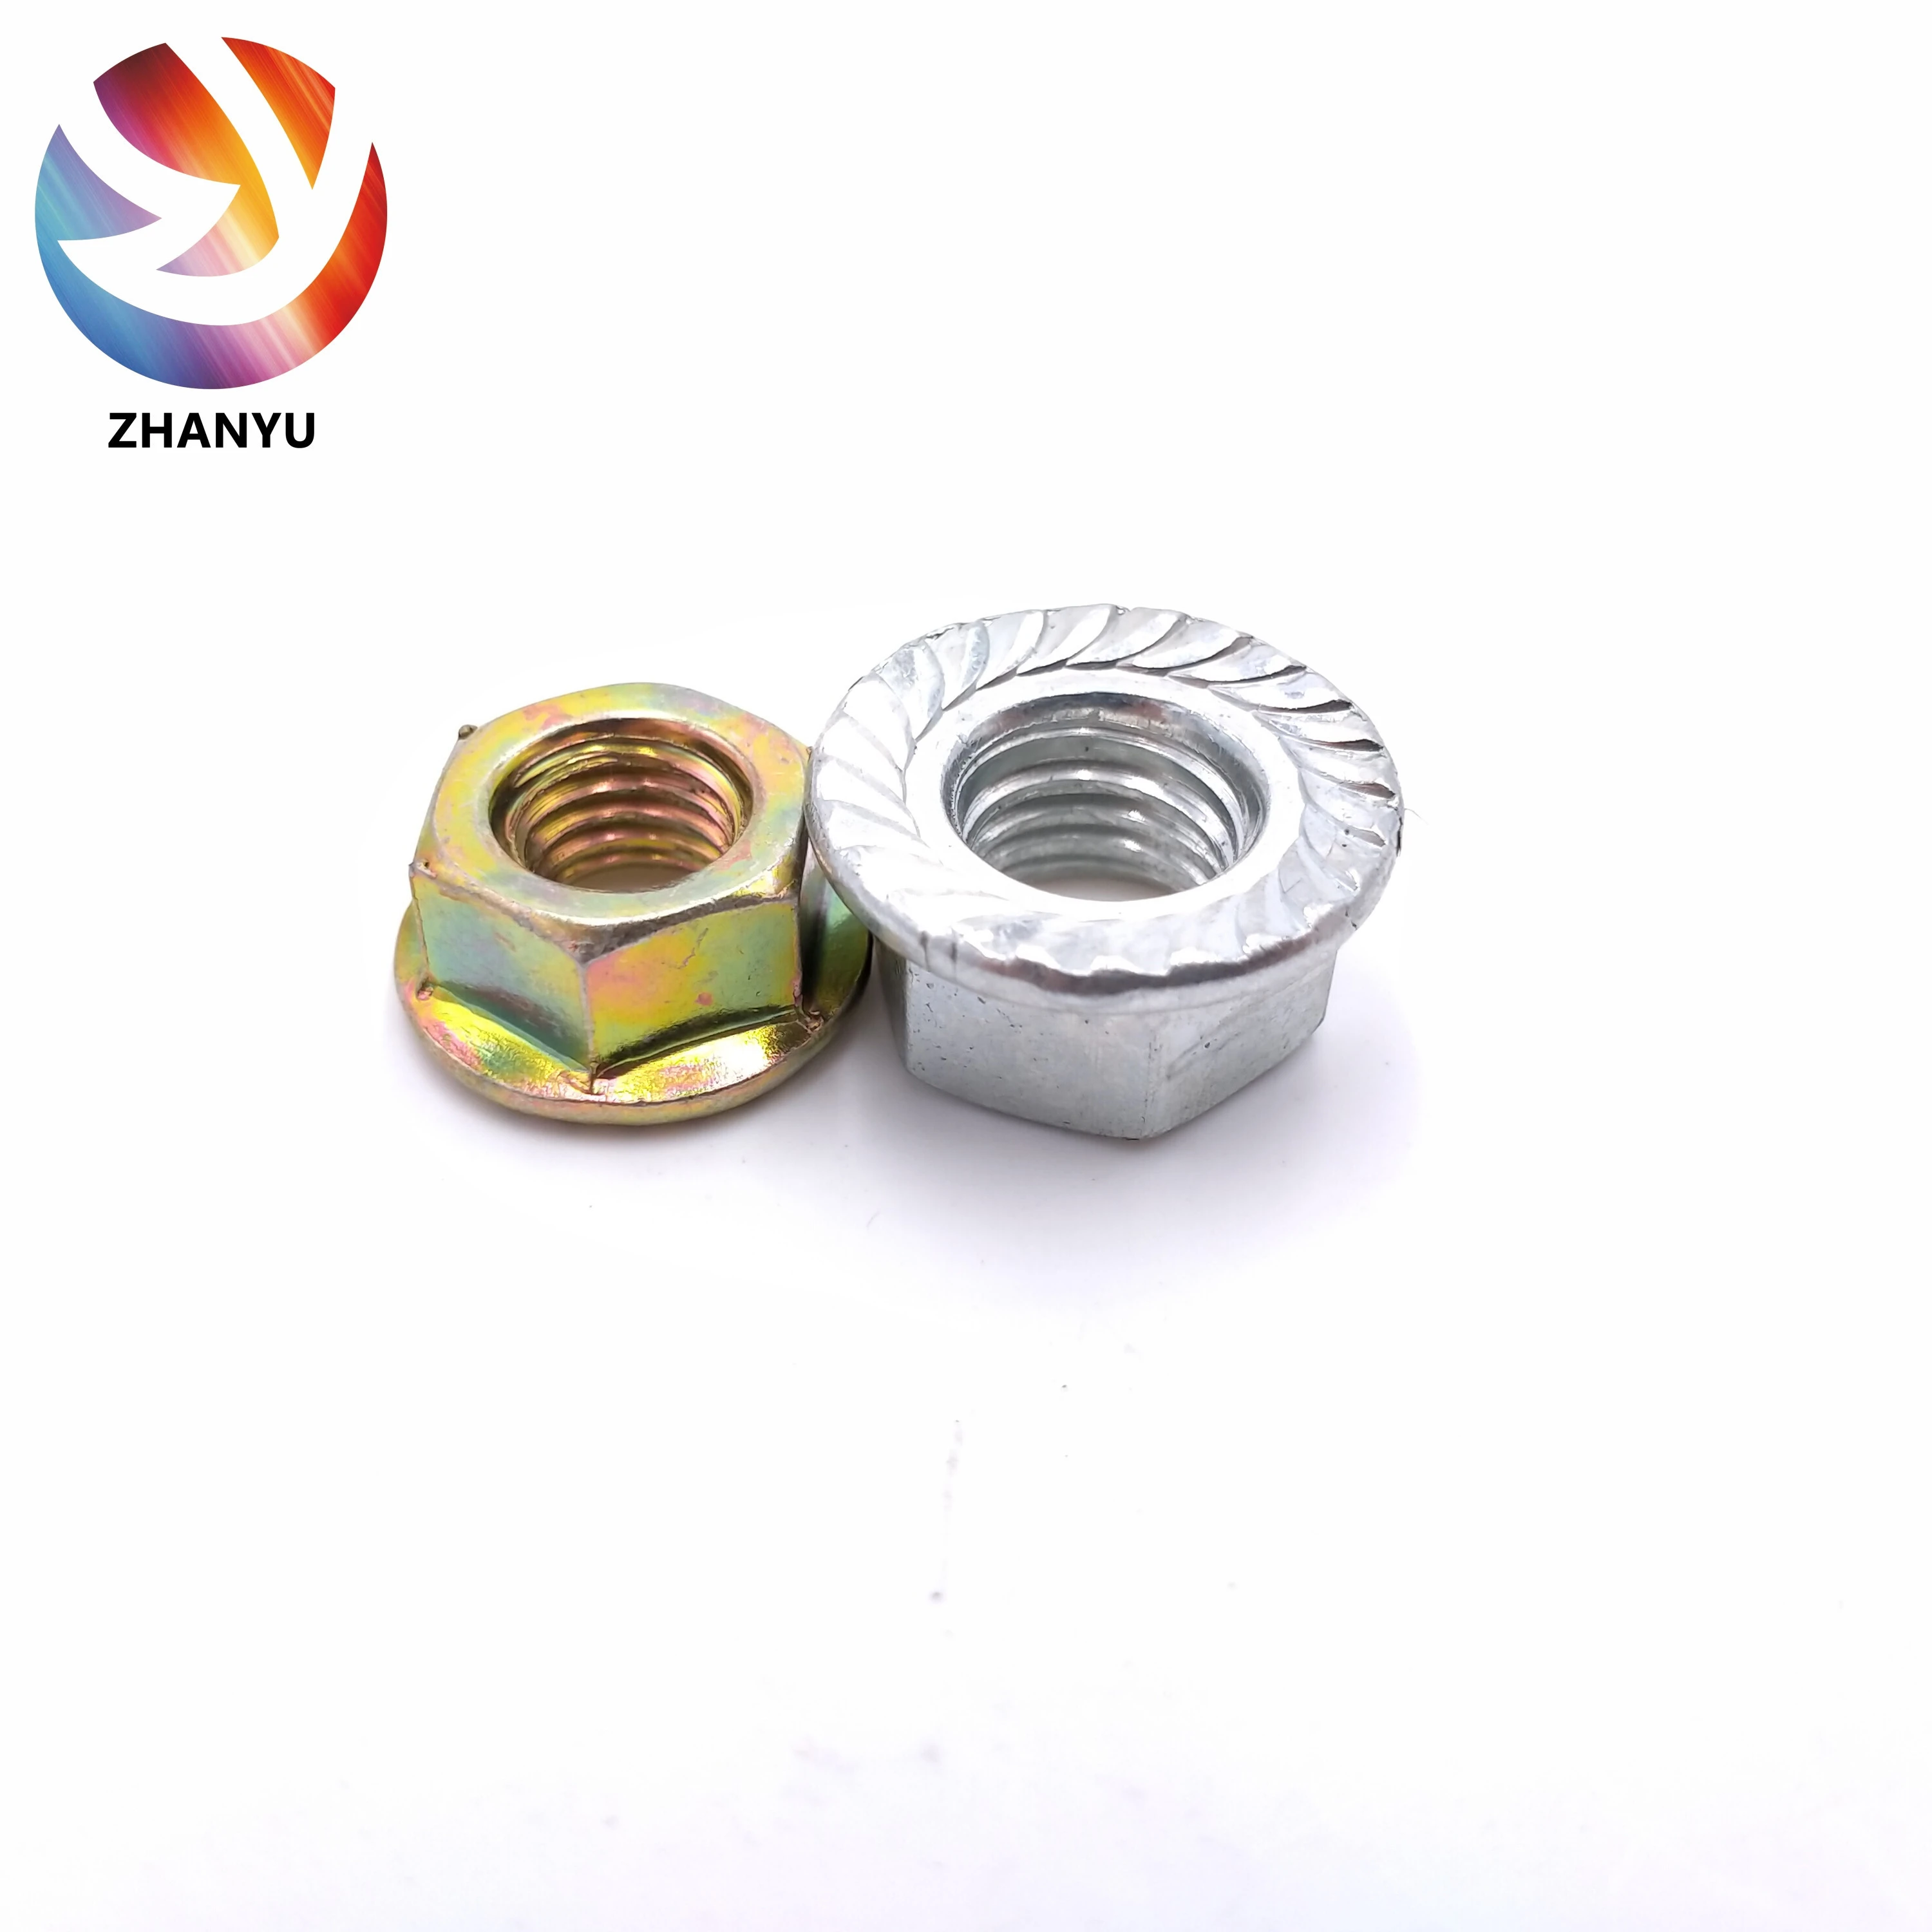 Factory Stock Custom Hexagon Nuts Flange Nut DIN /GB /ANSI /ISO Steel/stainless Steel 4/6/8/10/12 CN;HEB M6-M36 ZHANYU